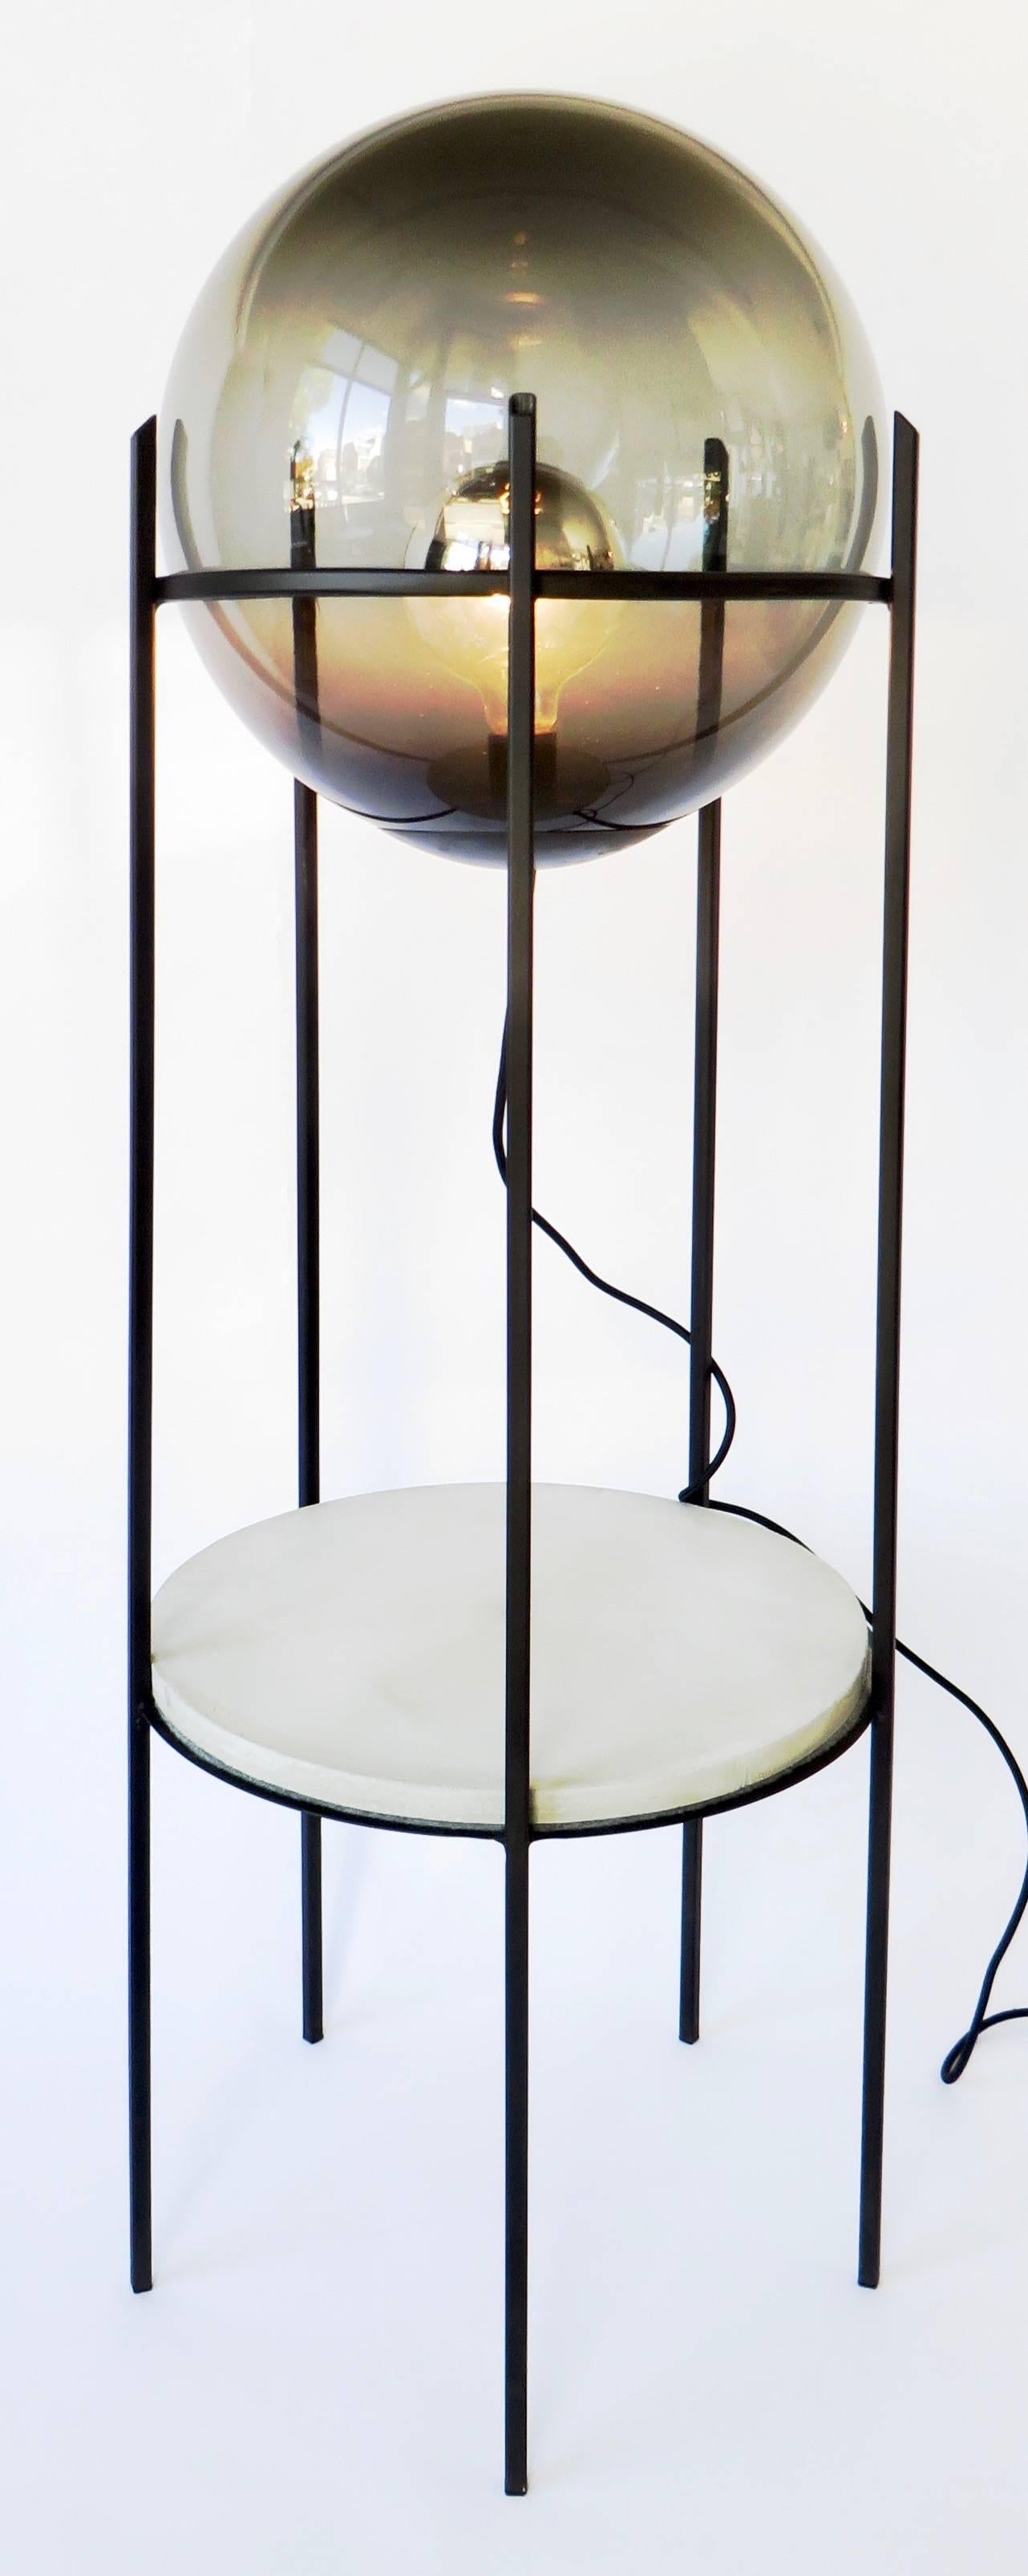 Two level floor lamp by contemporary artist and designer Hannah Vaughan.
Smoked handblown glass, cement plateau, and hand-wrought iron structure. 
 
Hannah Vaughan was born in Los Angeles, CA to a bookbinder and an artist. Hannah attended Oberlin